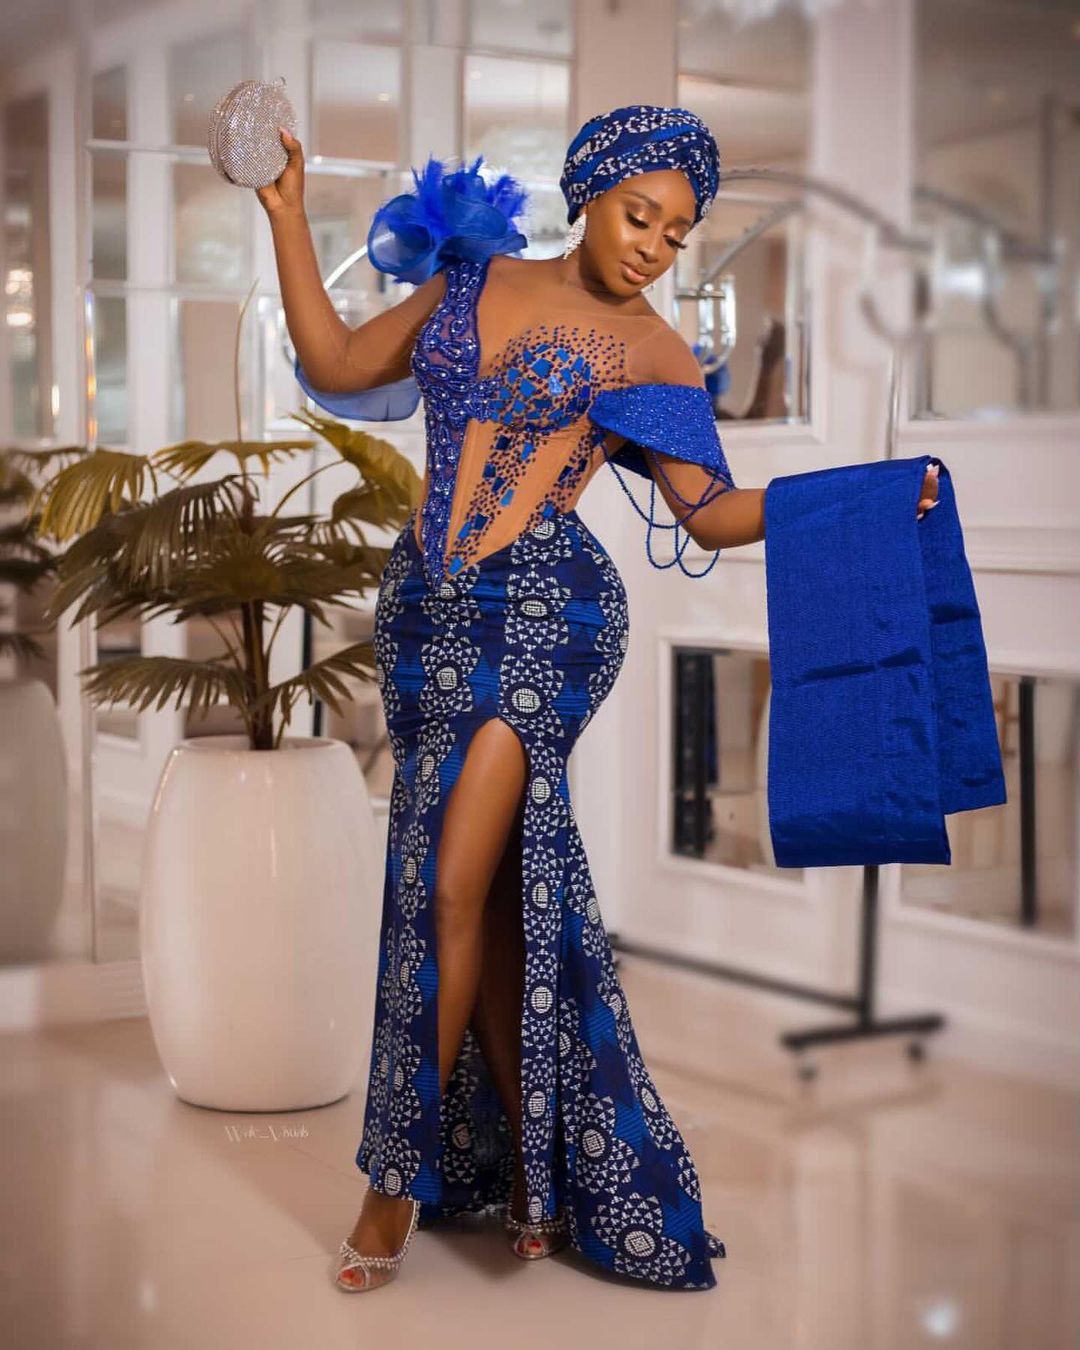 ini edo-draft-last-week-the-black-celebrities-and-style-influencers-took-their-style-personal